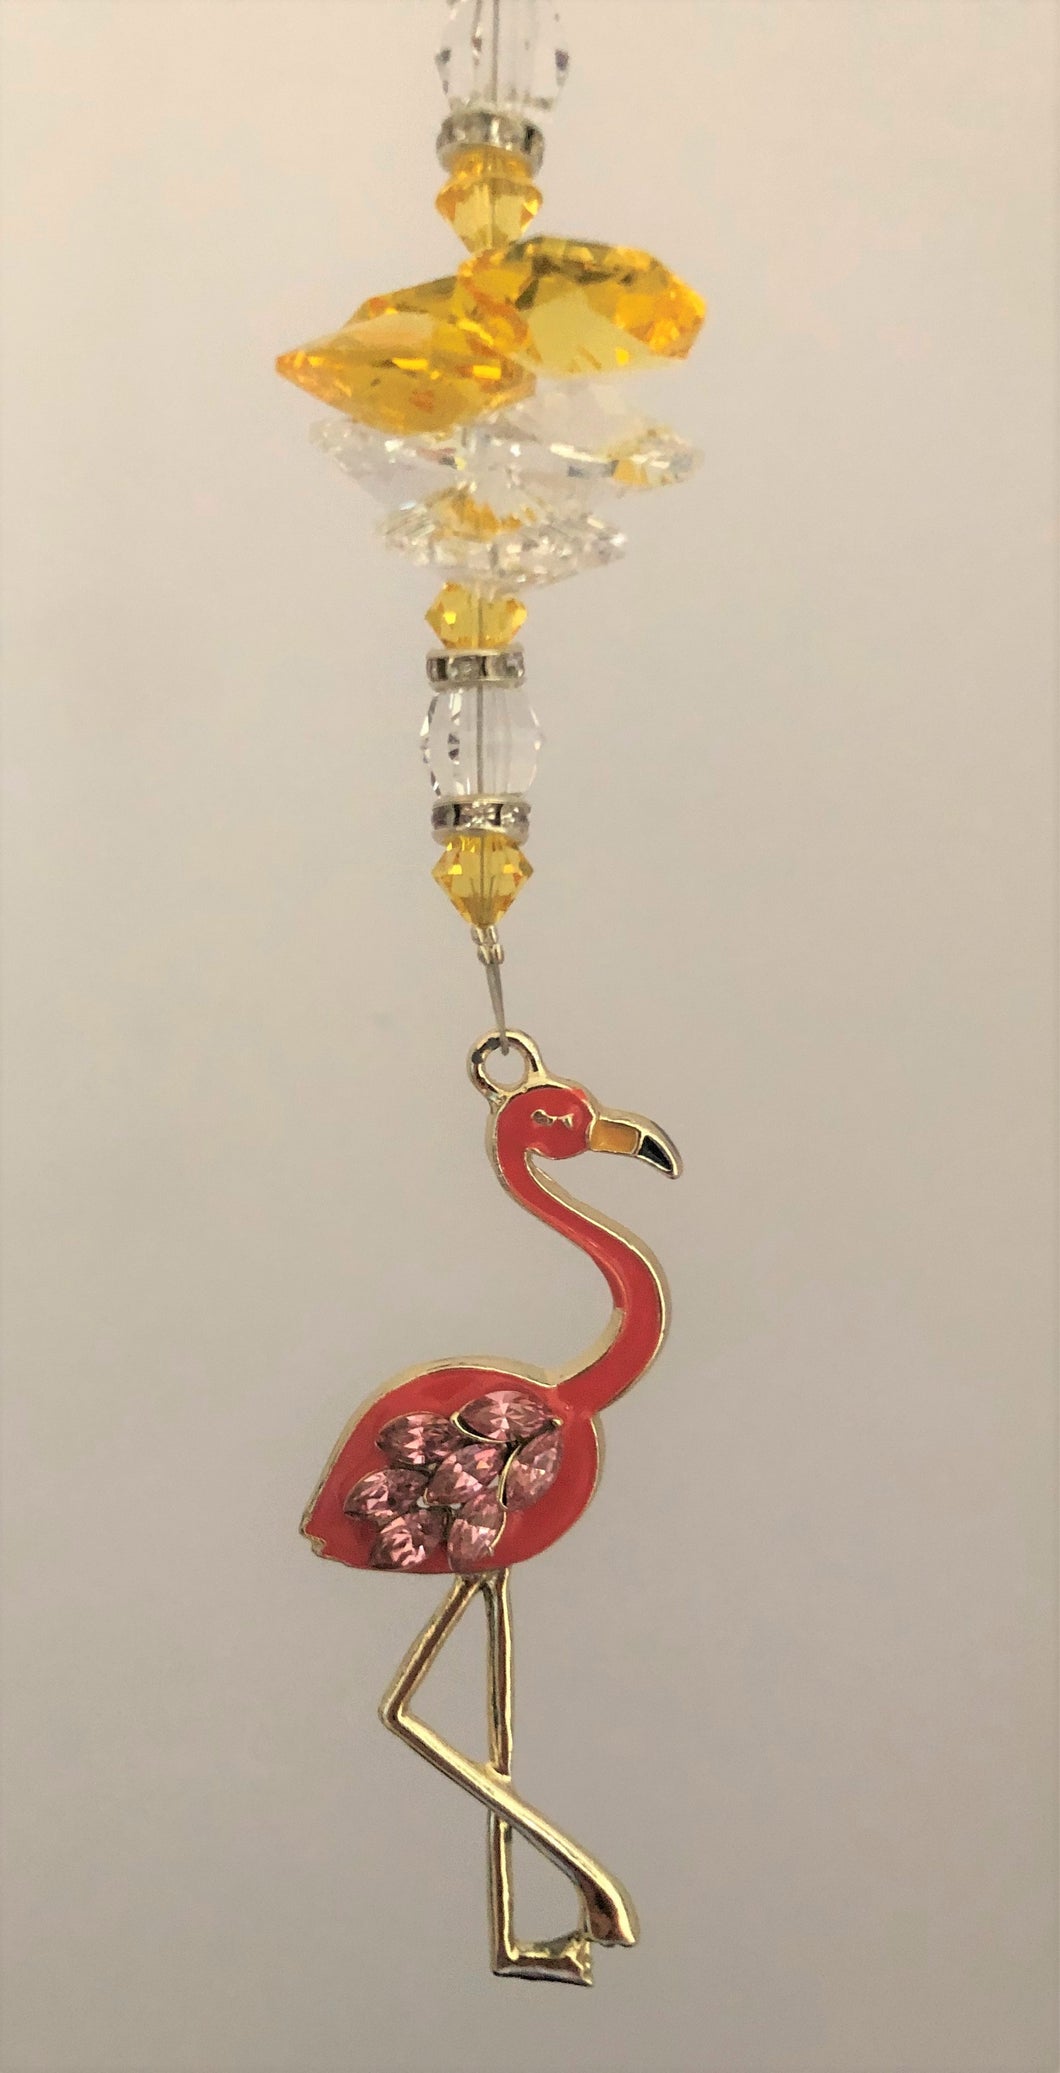 This beautiful pink Flamingo suncatcher which is decorated with crystals and Citrine